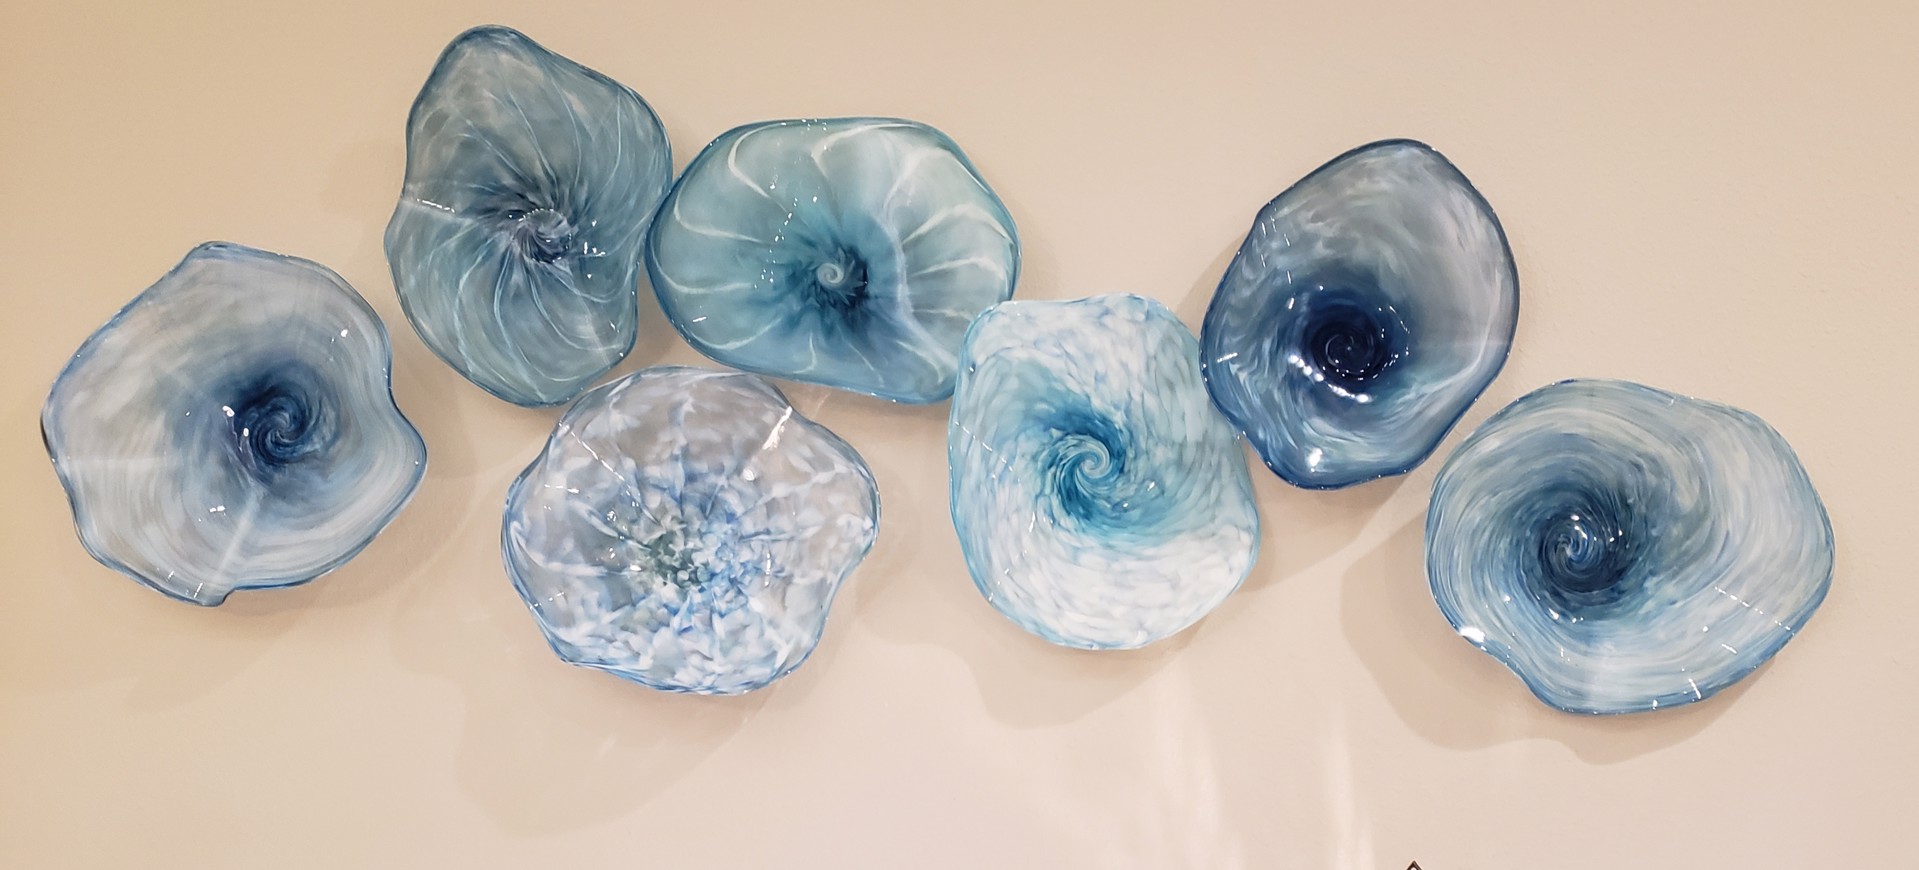 7 Piece Glass Blossom Installation by T. Miller